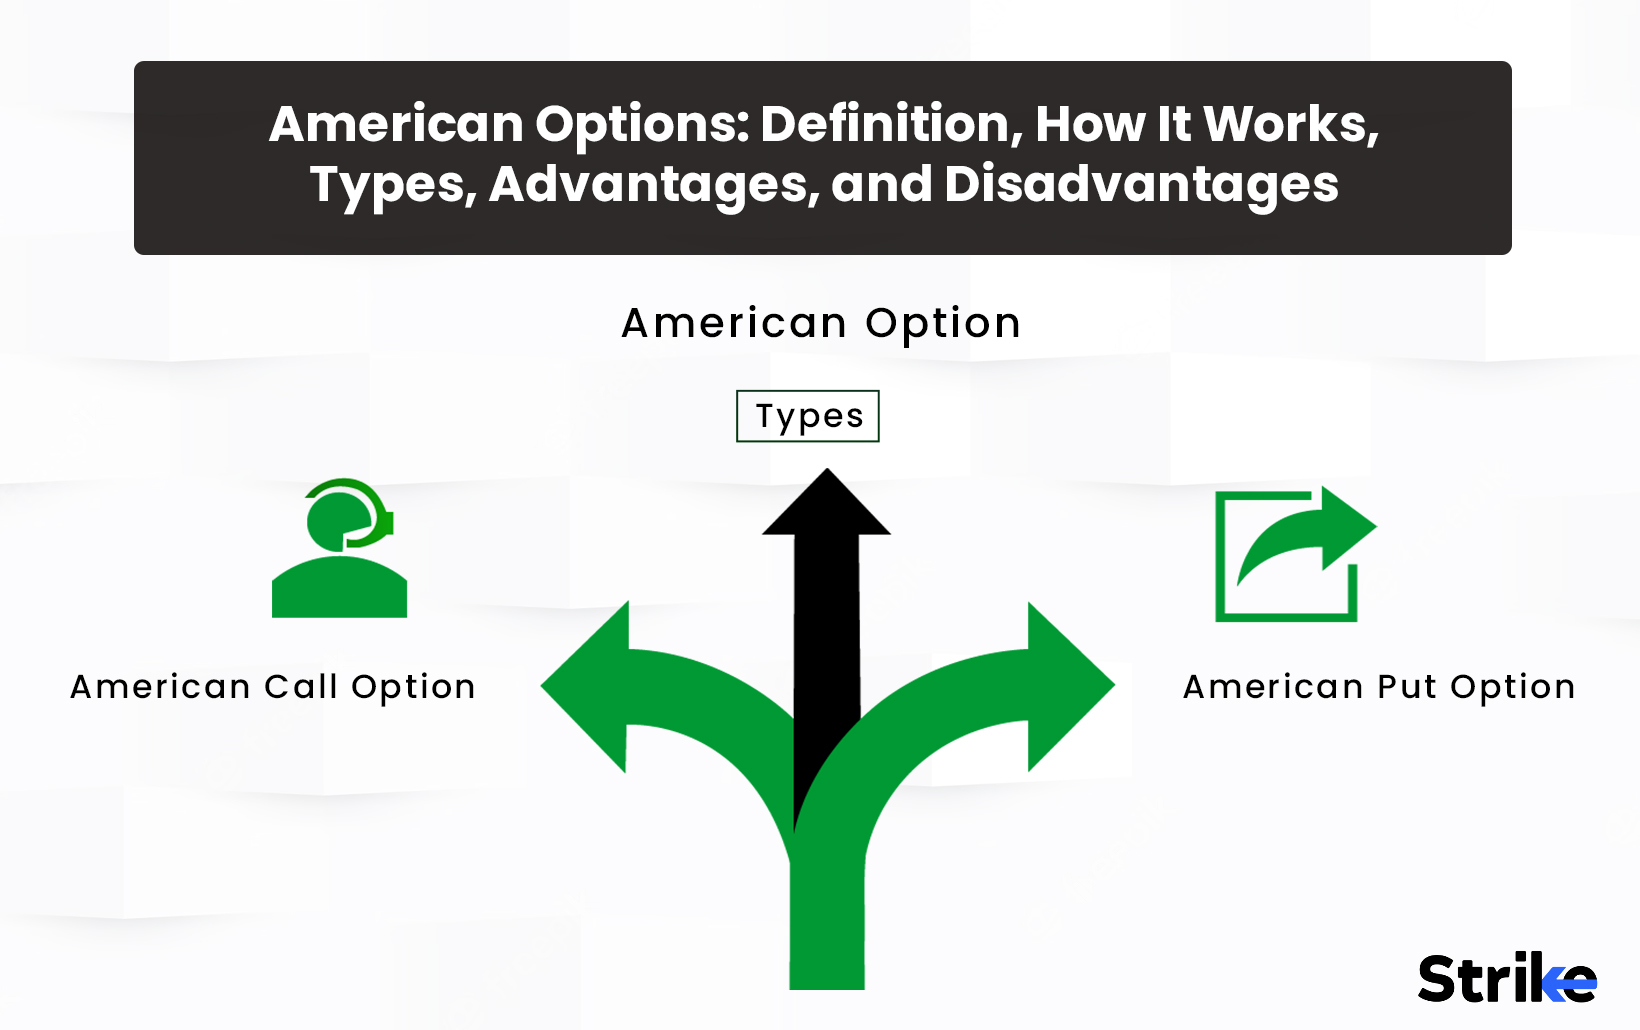 American Options: Definition, How It Works, Types, Advantages, and Disadvantages